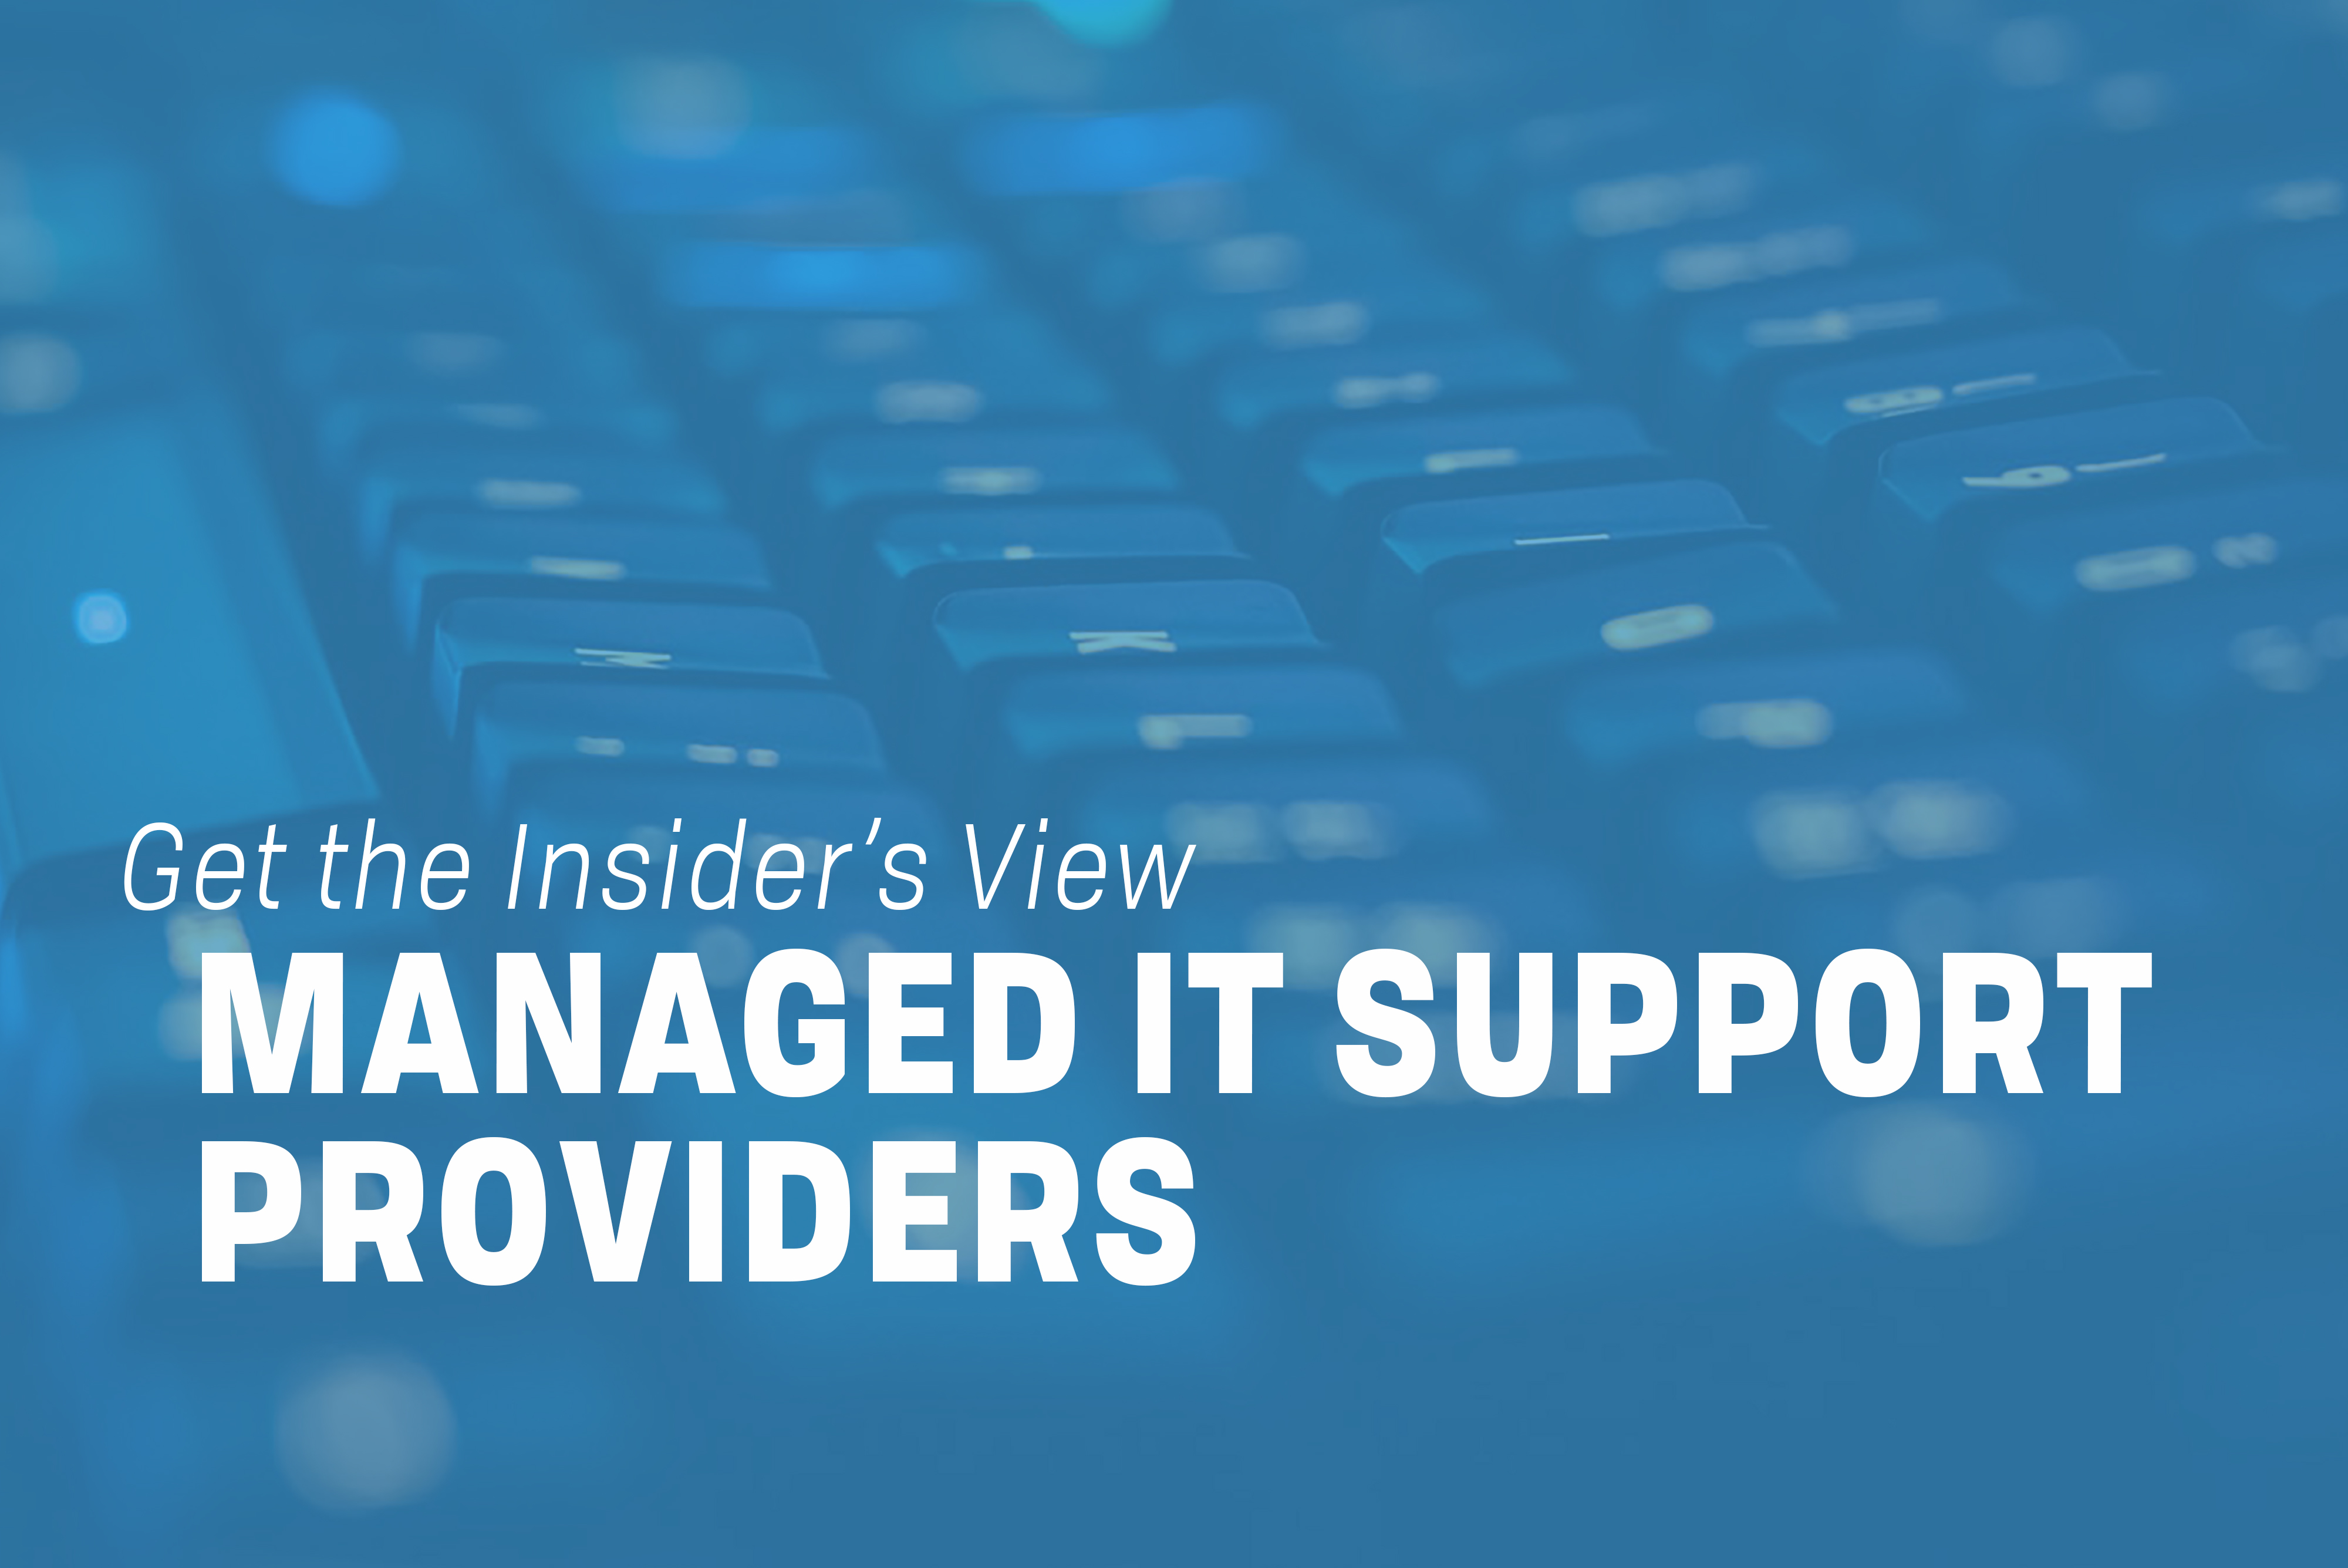 You are currently viewing What do Managed IT Support Providers Really Do? Get the Insider’s View